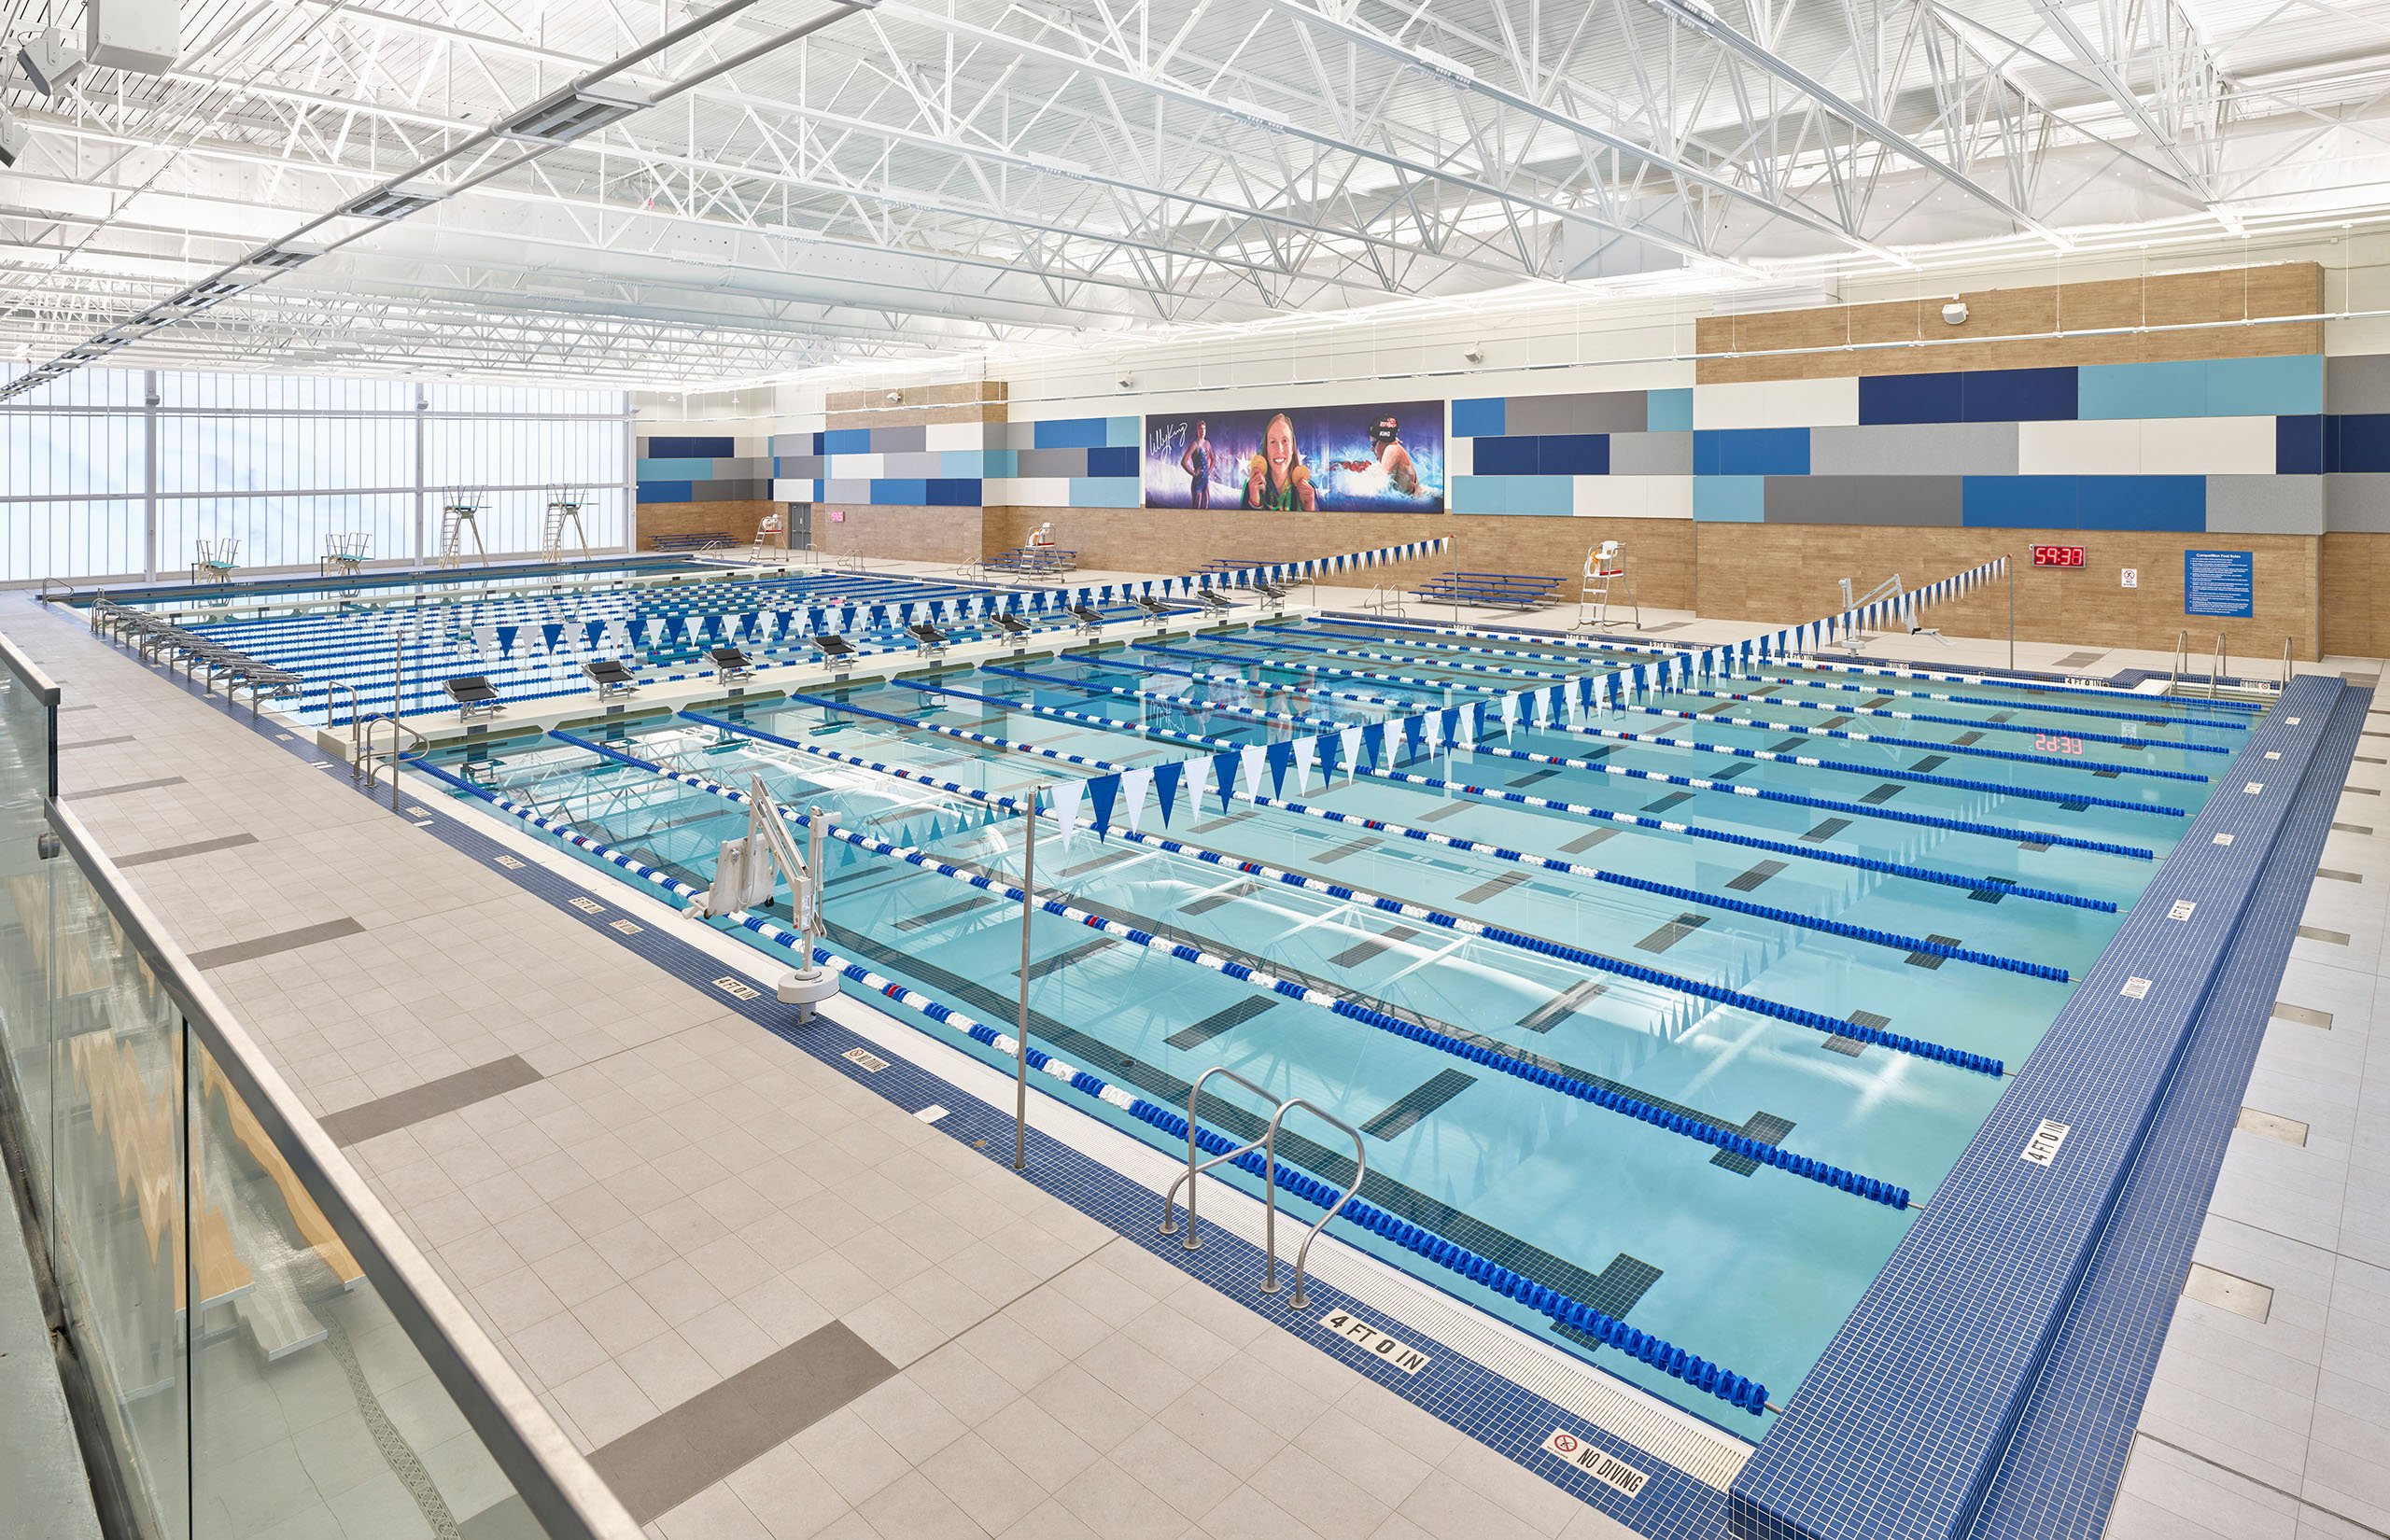 Overhead view of indoor competitive pool